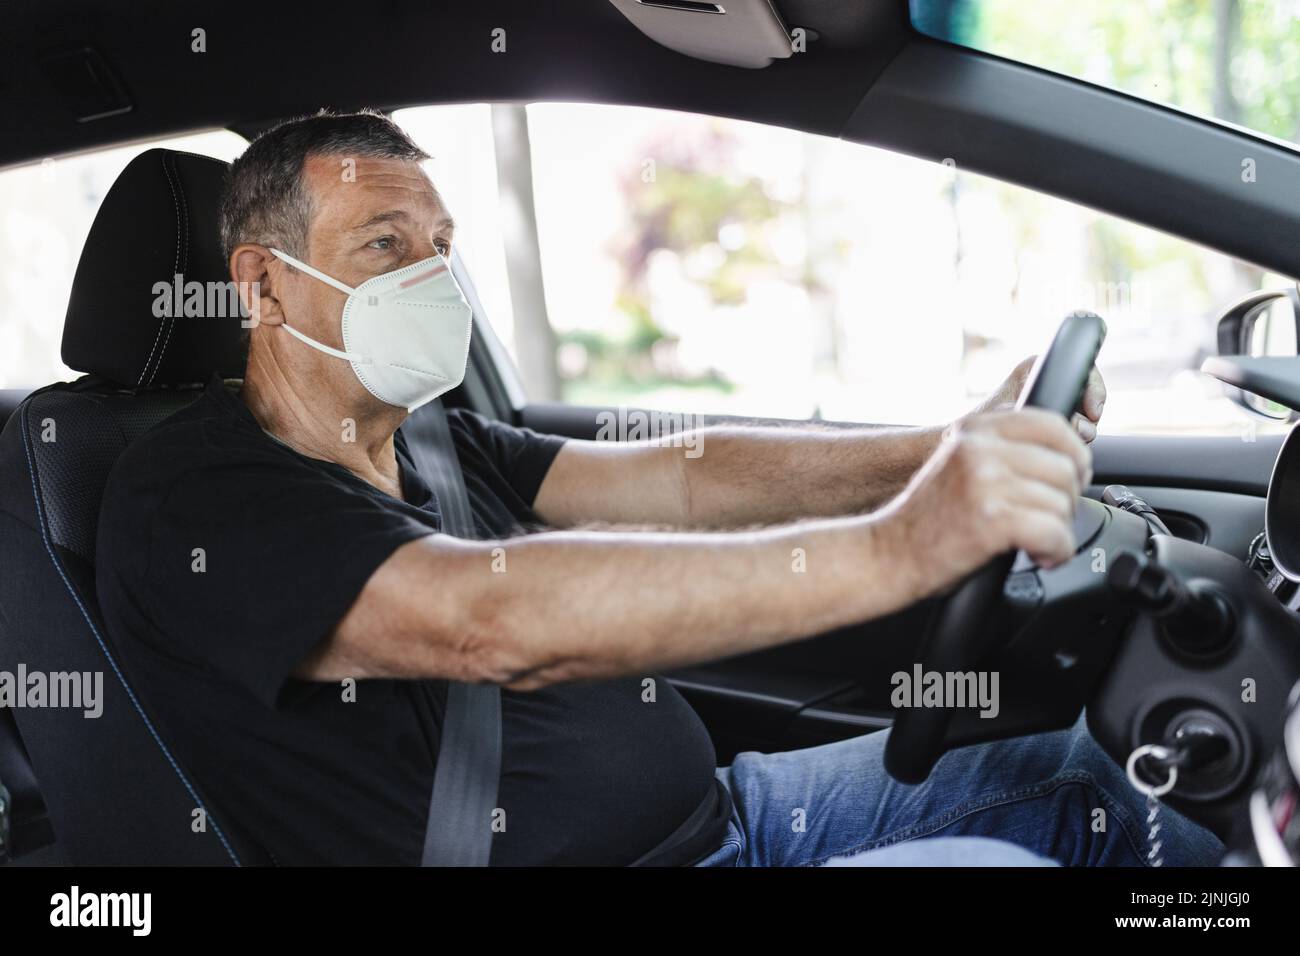 Senior in his 70s driving a car wearing face mask for protection against corona virus Stock Photo